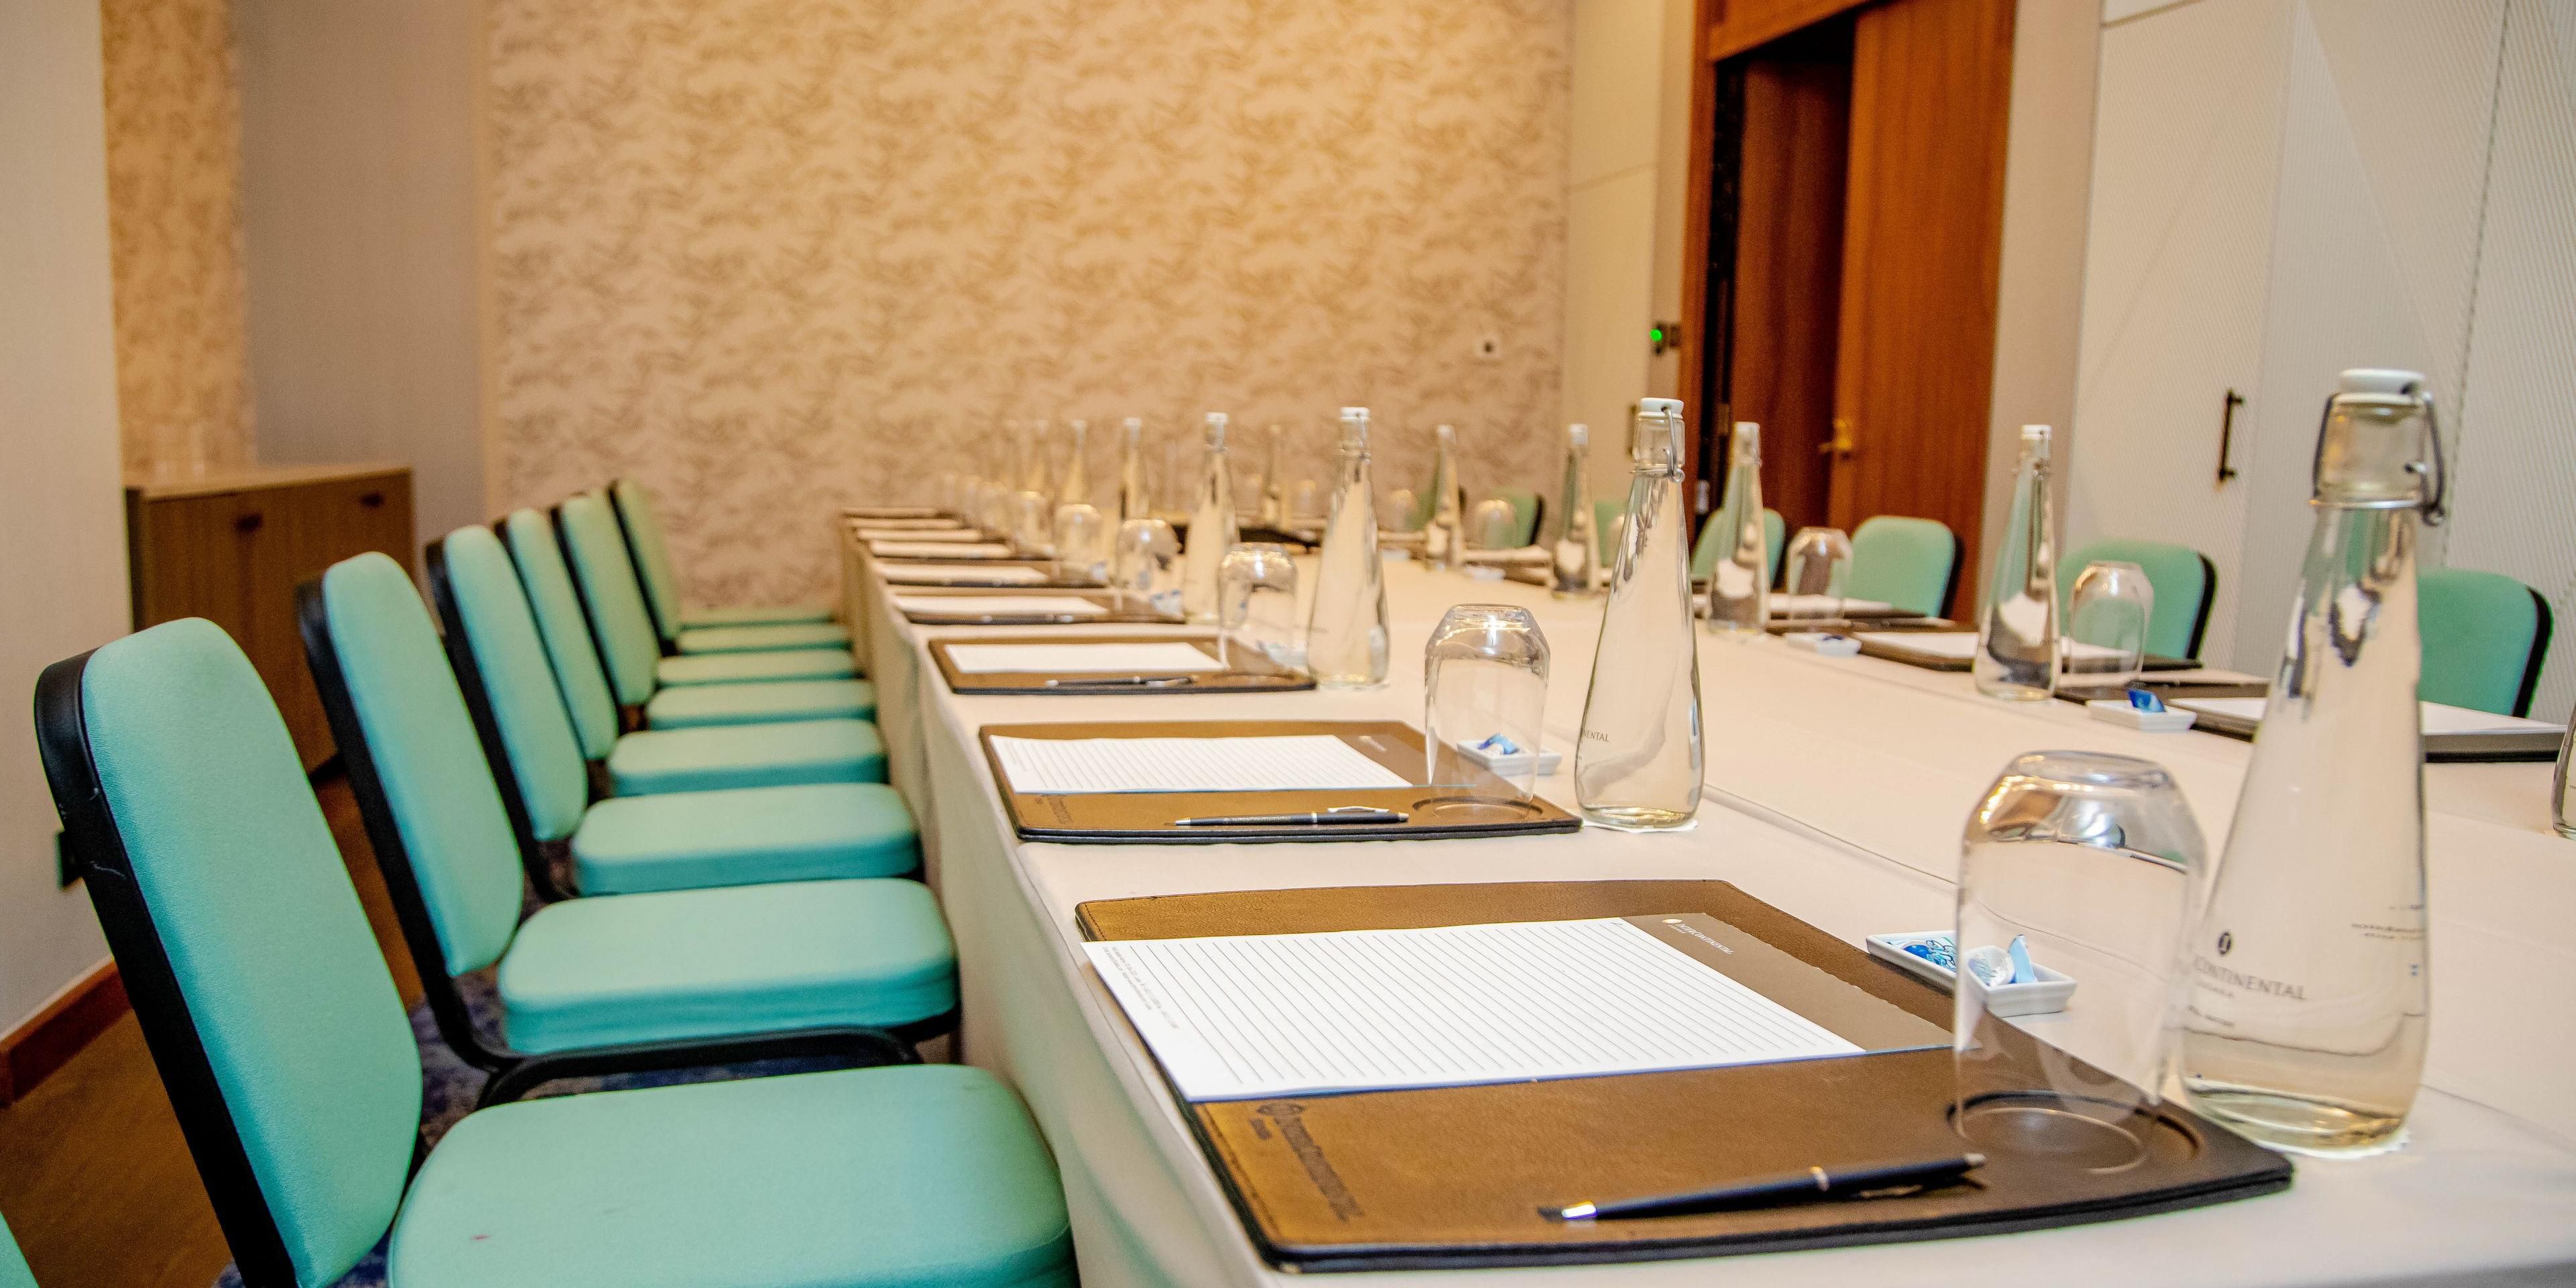 Planning a conference or meeting? InterContinental's extensive conference facilities are perfect for that seamless event. The meeting rooms are equipped with modern Audio/ visual equipment, specific rooms feature natural light and all functions are operated under the InterContinental meetings standards.

